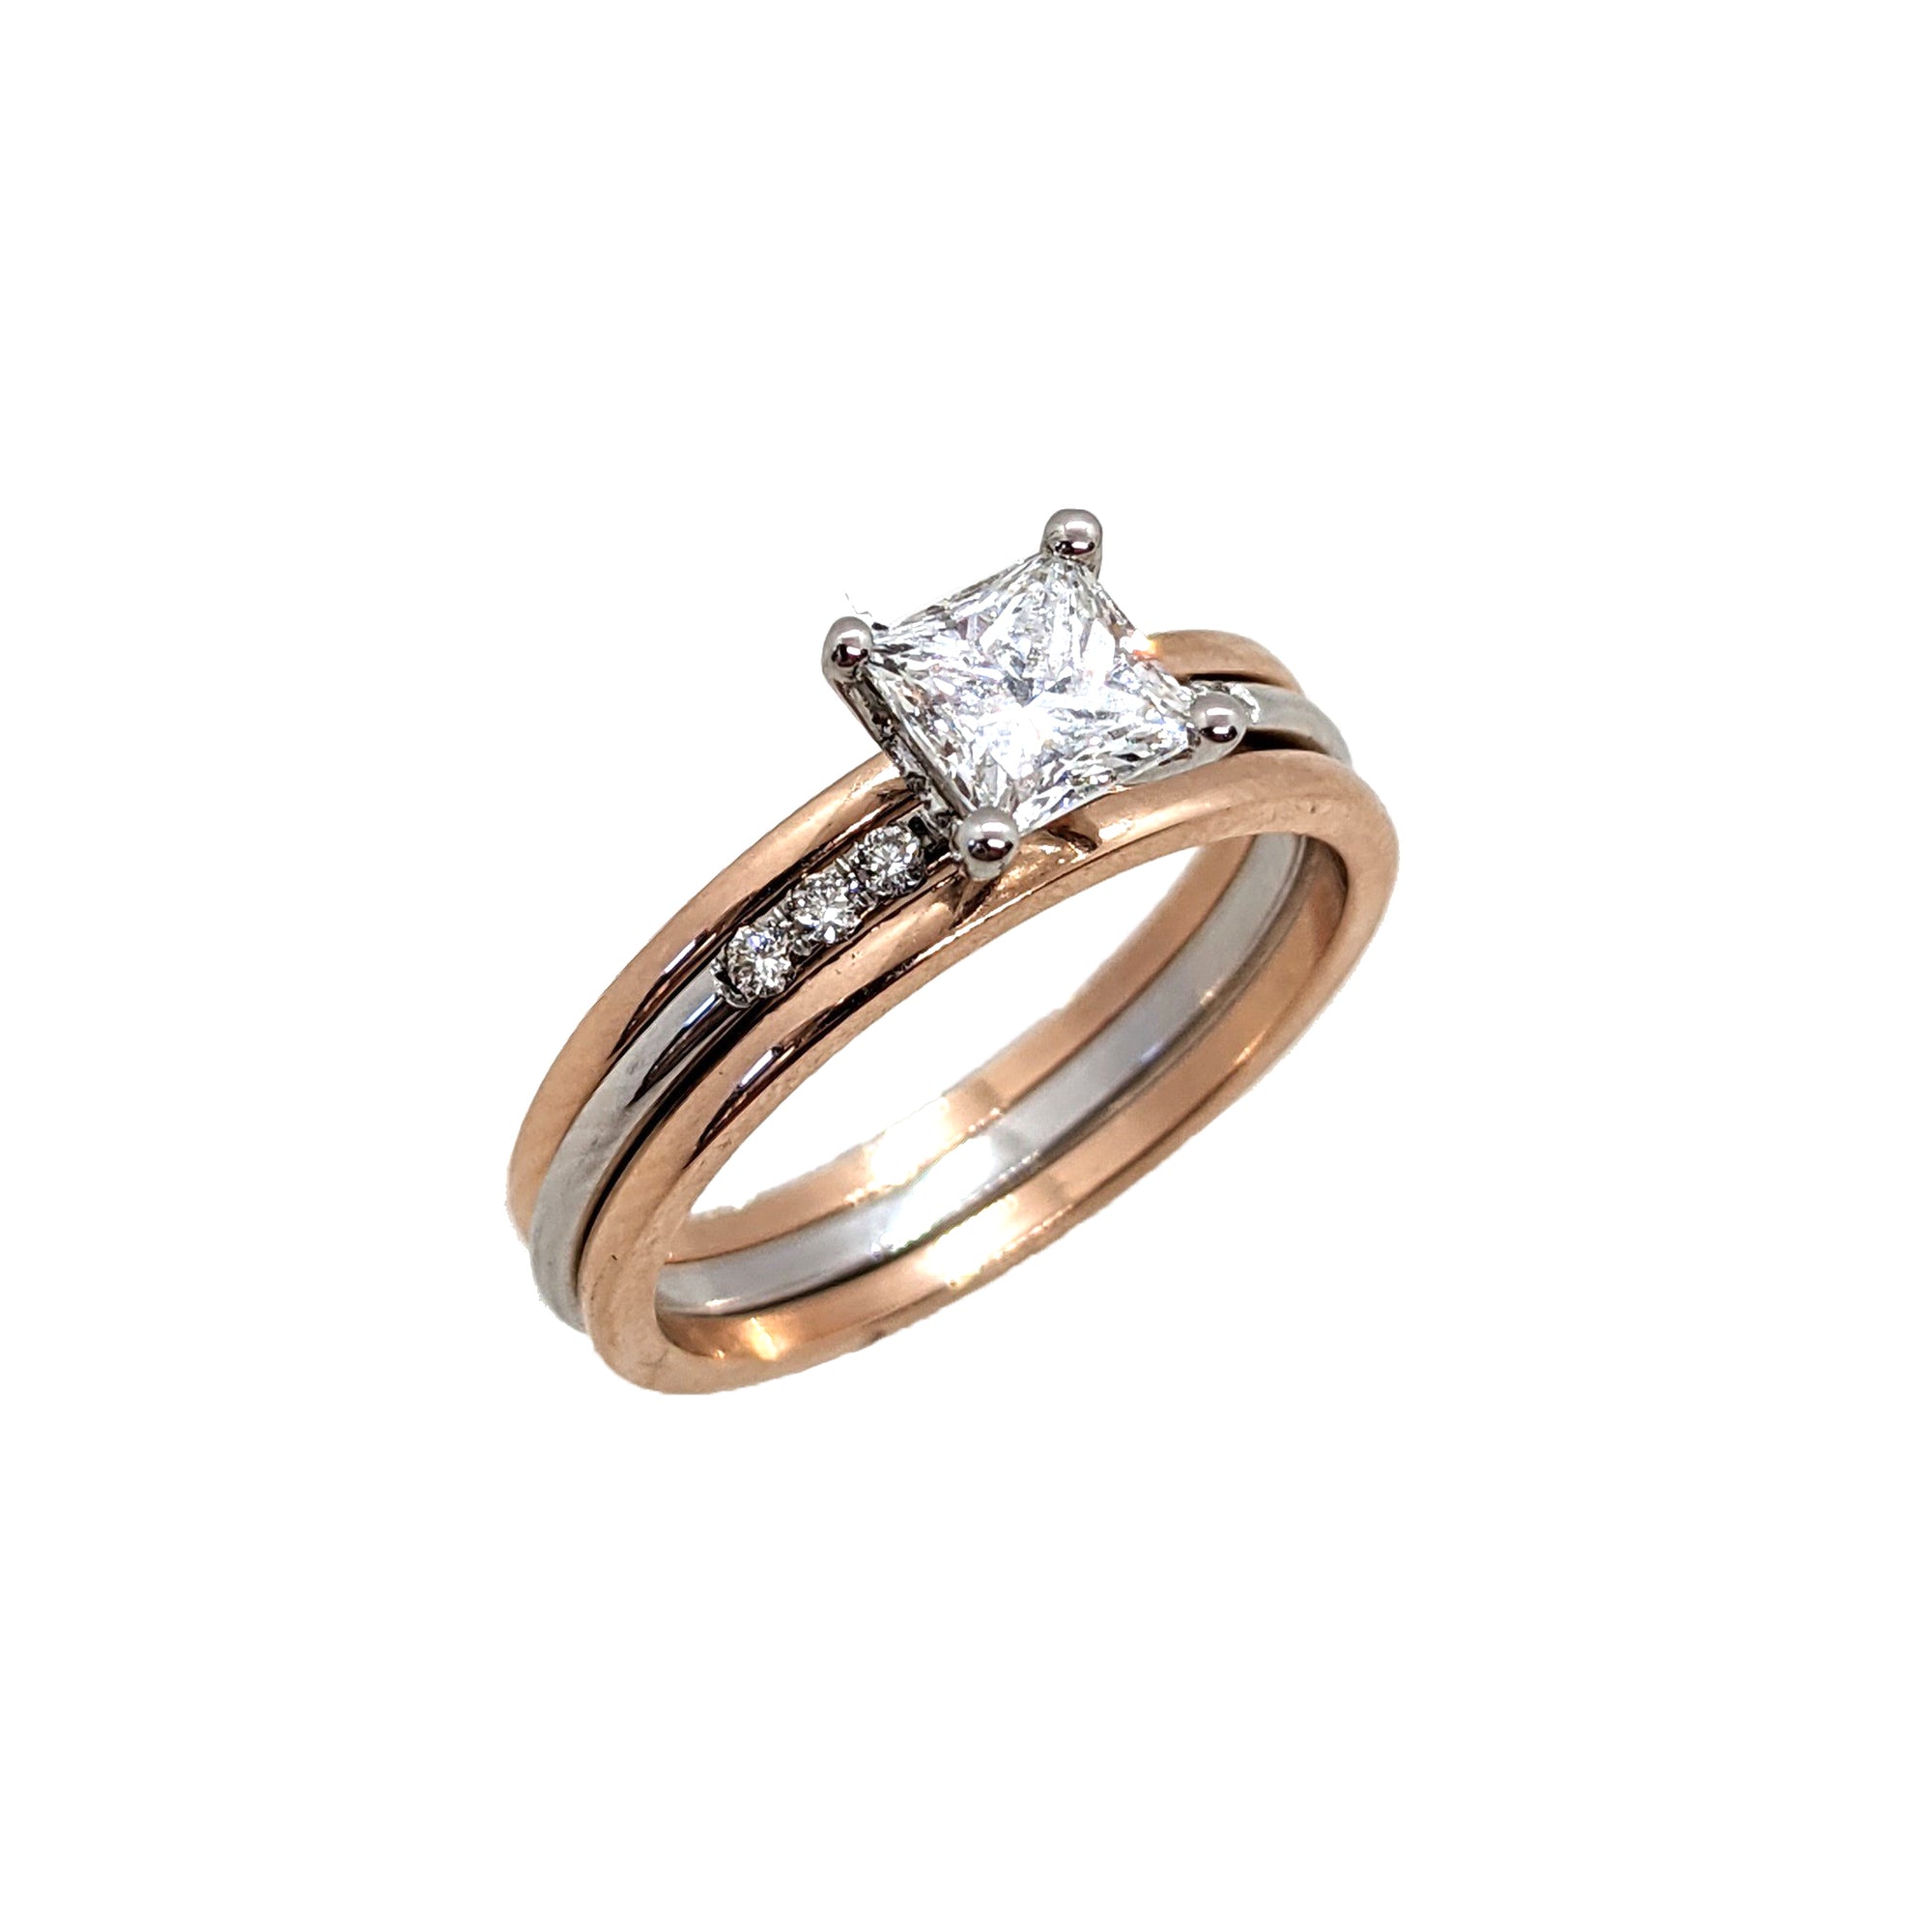 14K W/G Princess Cut Diamond Ring with Two R/G Bands